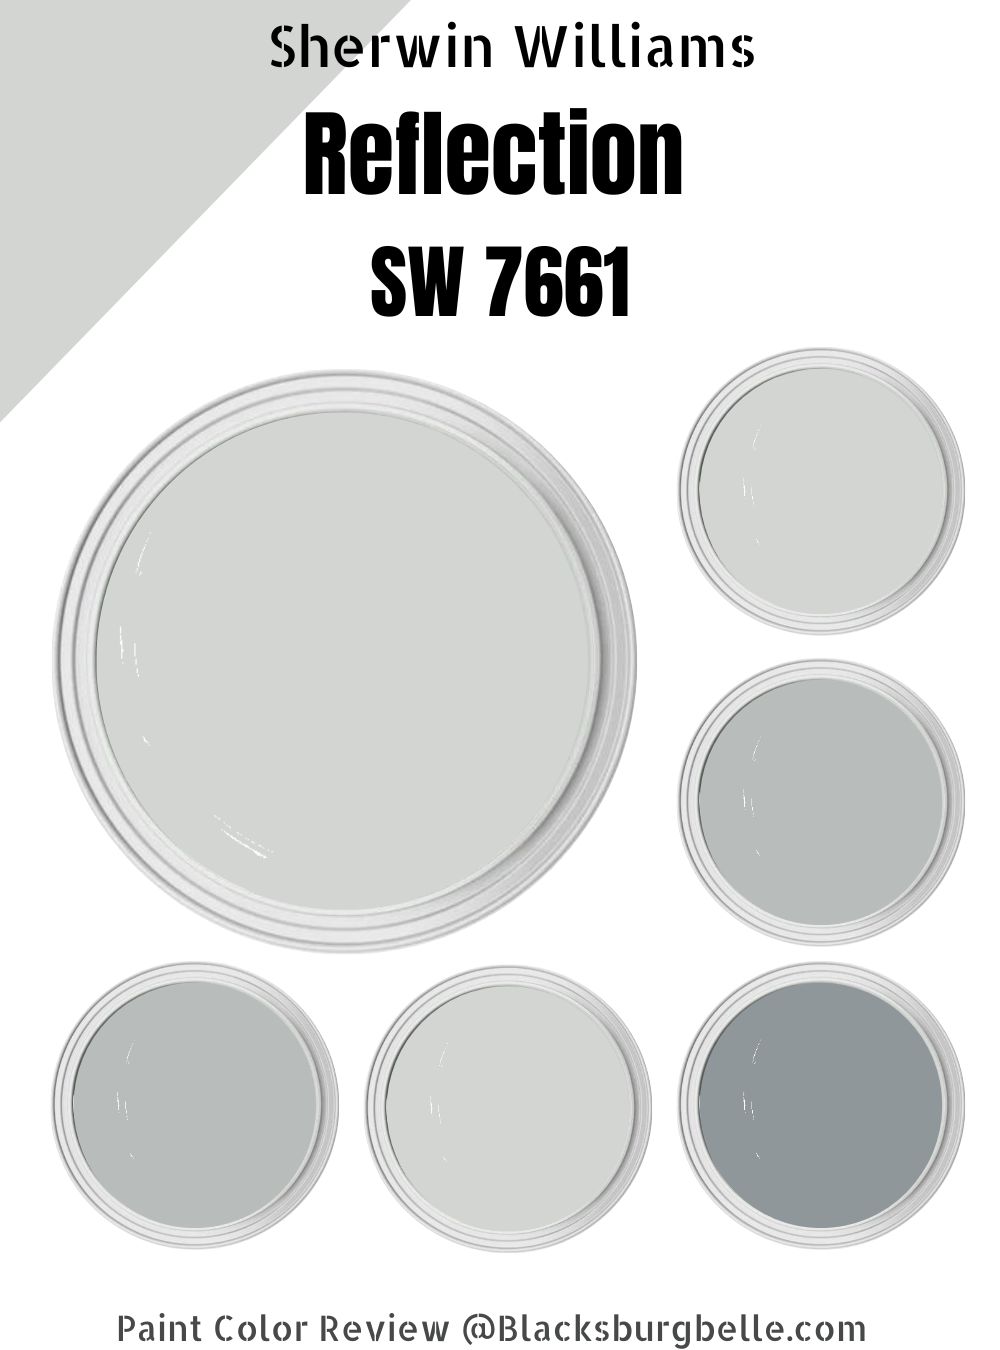 Sherwin Williams Reflection (SW 7661) Paint Color Review